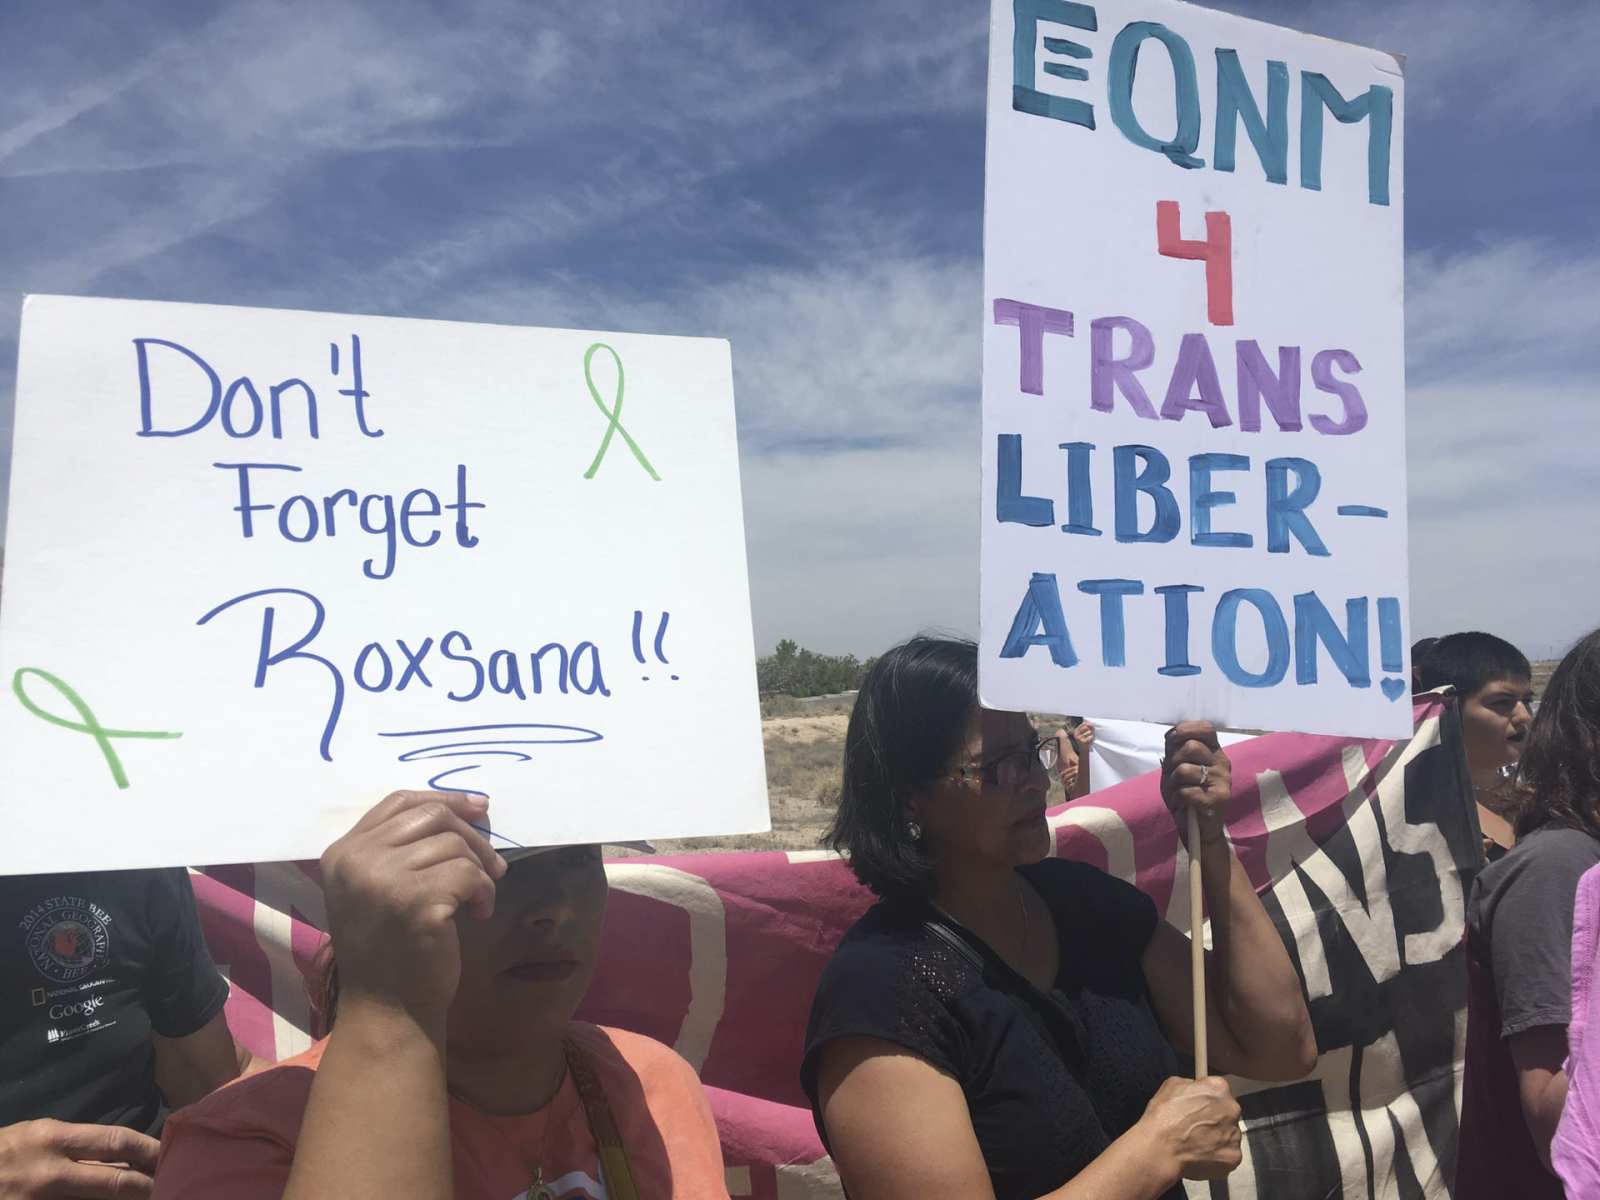 Protesters hold up signs as they gather outside a U.S. Immigration and Customs Enforcement office in Albuquerque, New Mexico, on Wednesday, June 6, 2018. Immigrant and LGBT rights advocates held the protest in response to the death of Roxsana Hernandez, a Honduran transgender woman who was in ICE custody and showing signs of pneumonia, dehydration and complications associated with HIV when she was admitted to an Albuquerque hospital last month.